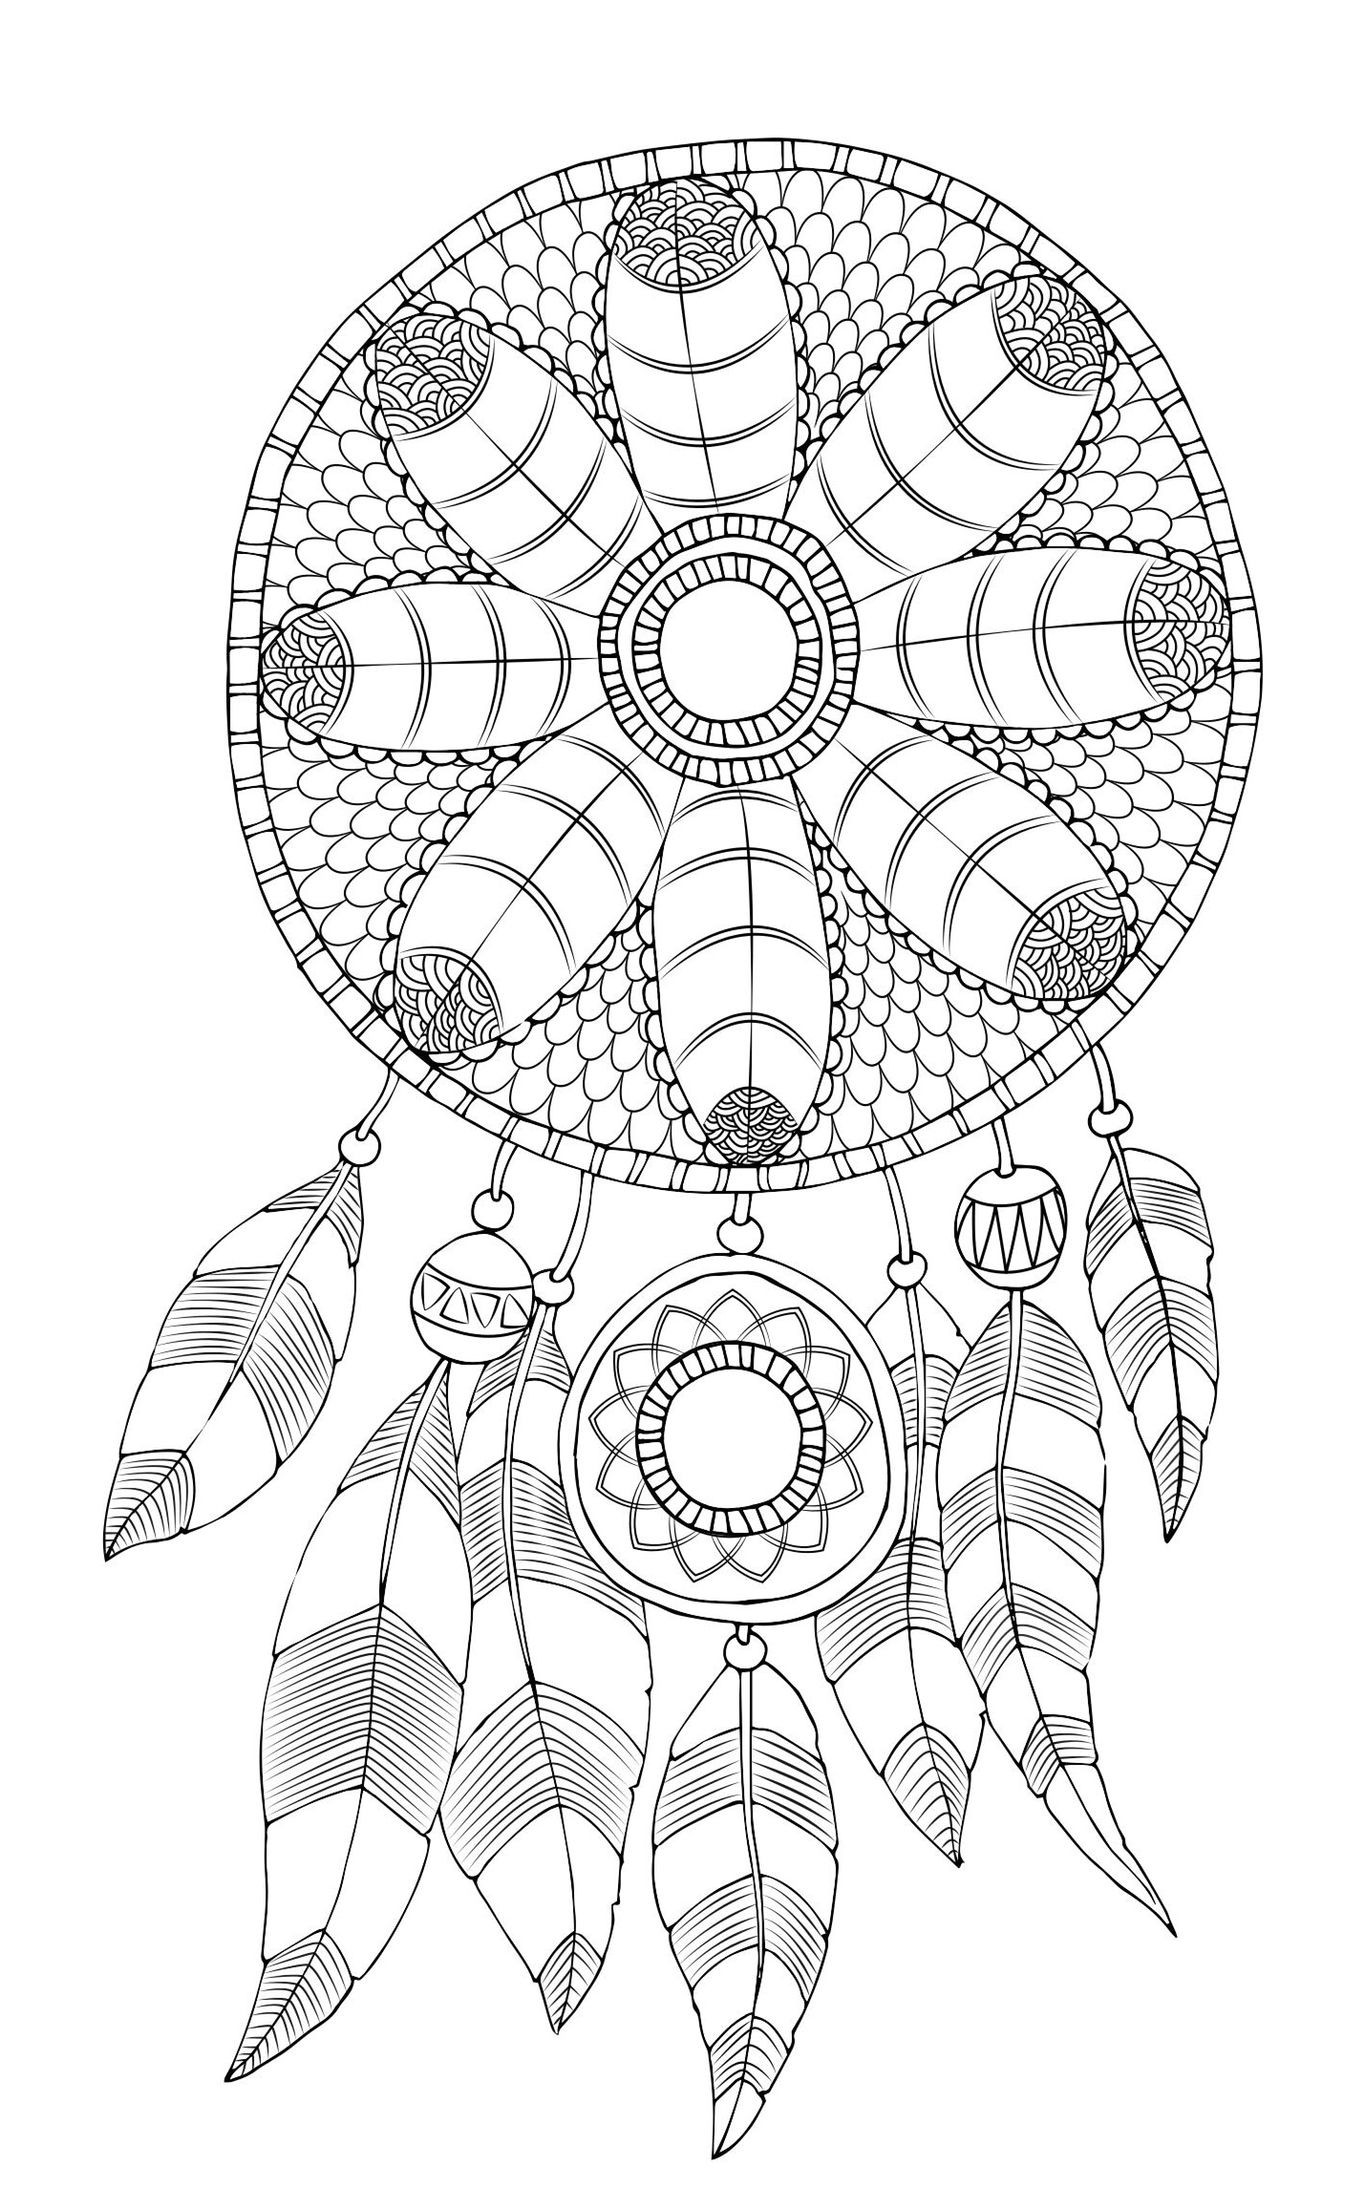 Printable Adult Coloring Pages Dream Catchers
 Free adult coloring page Dreamcatcher